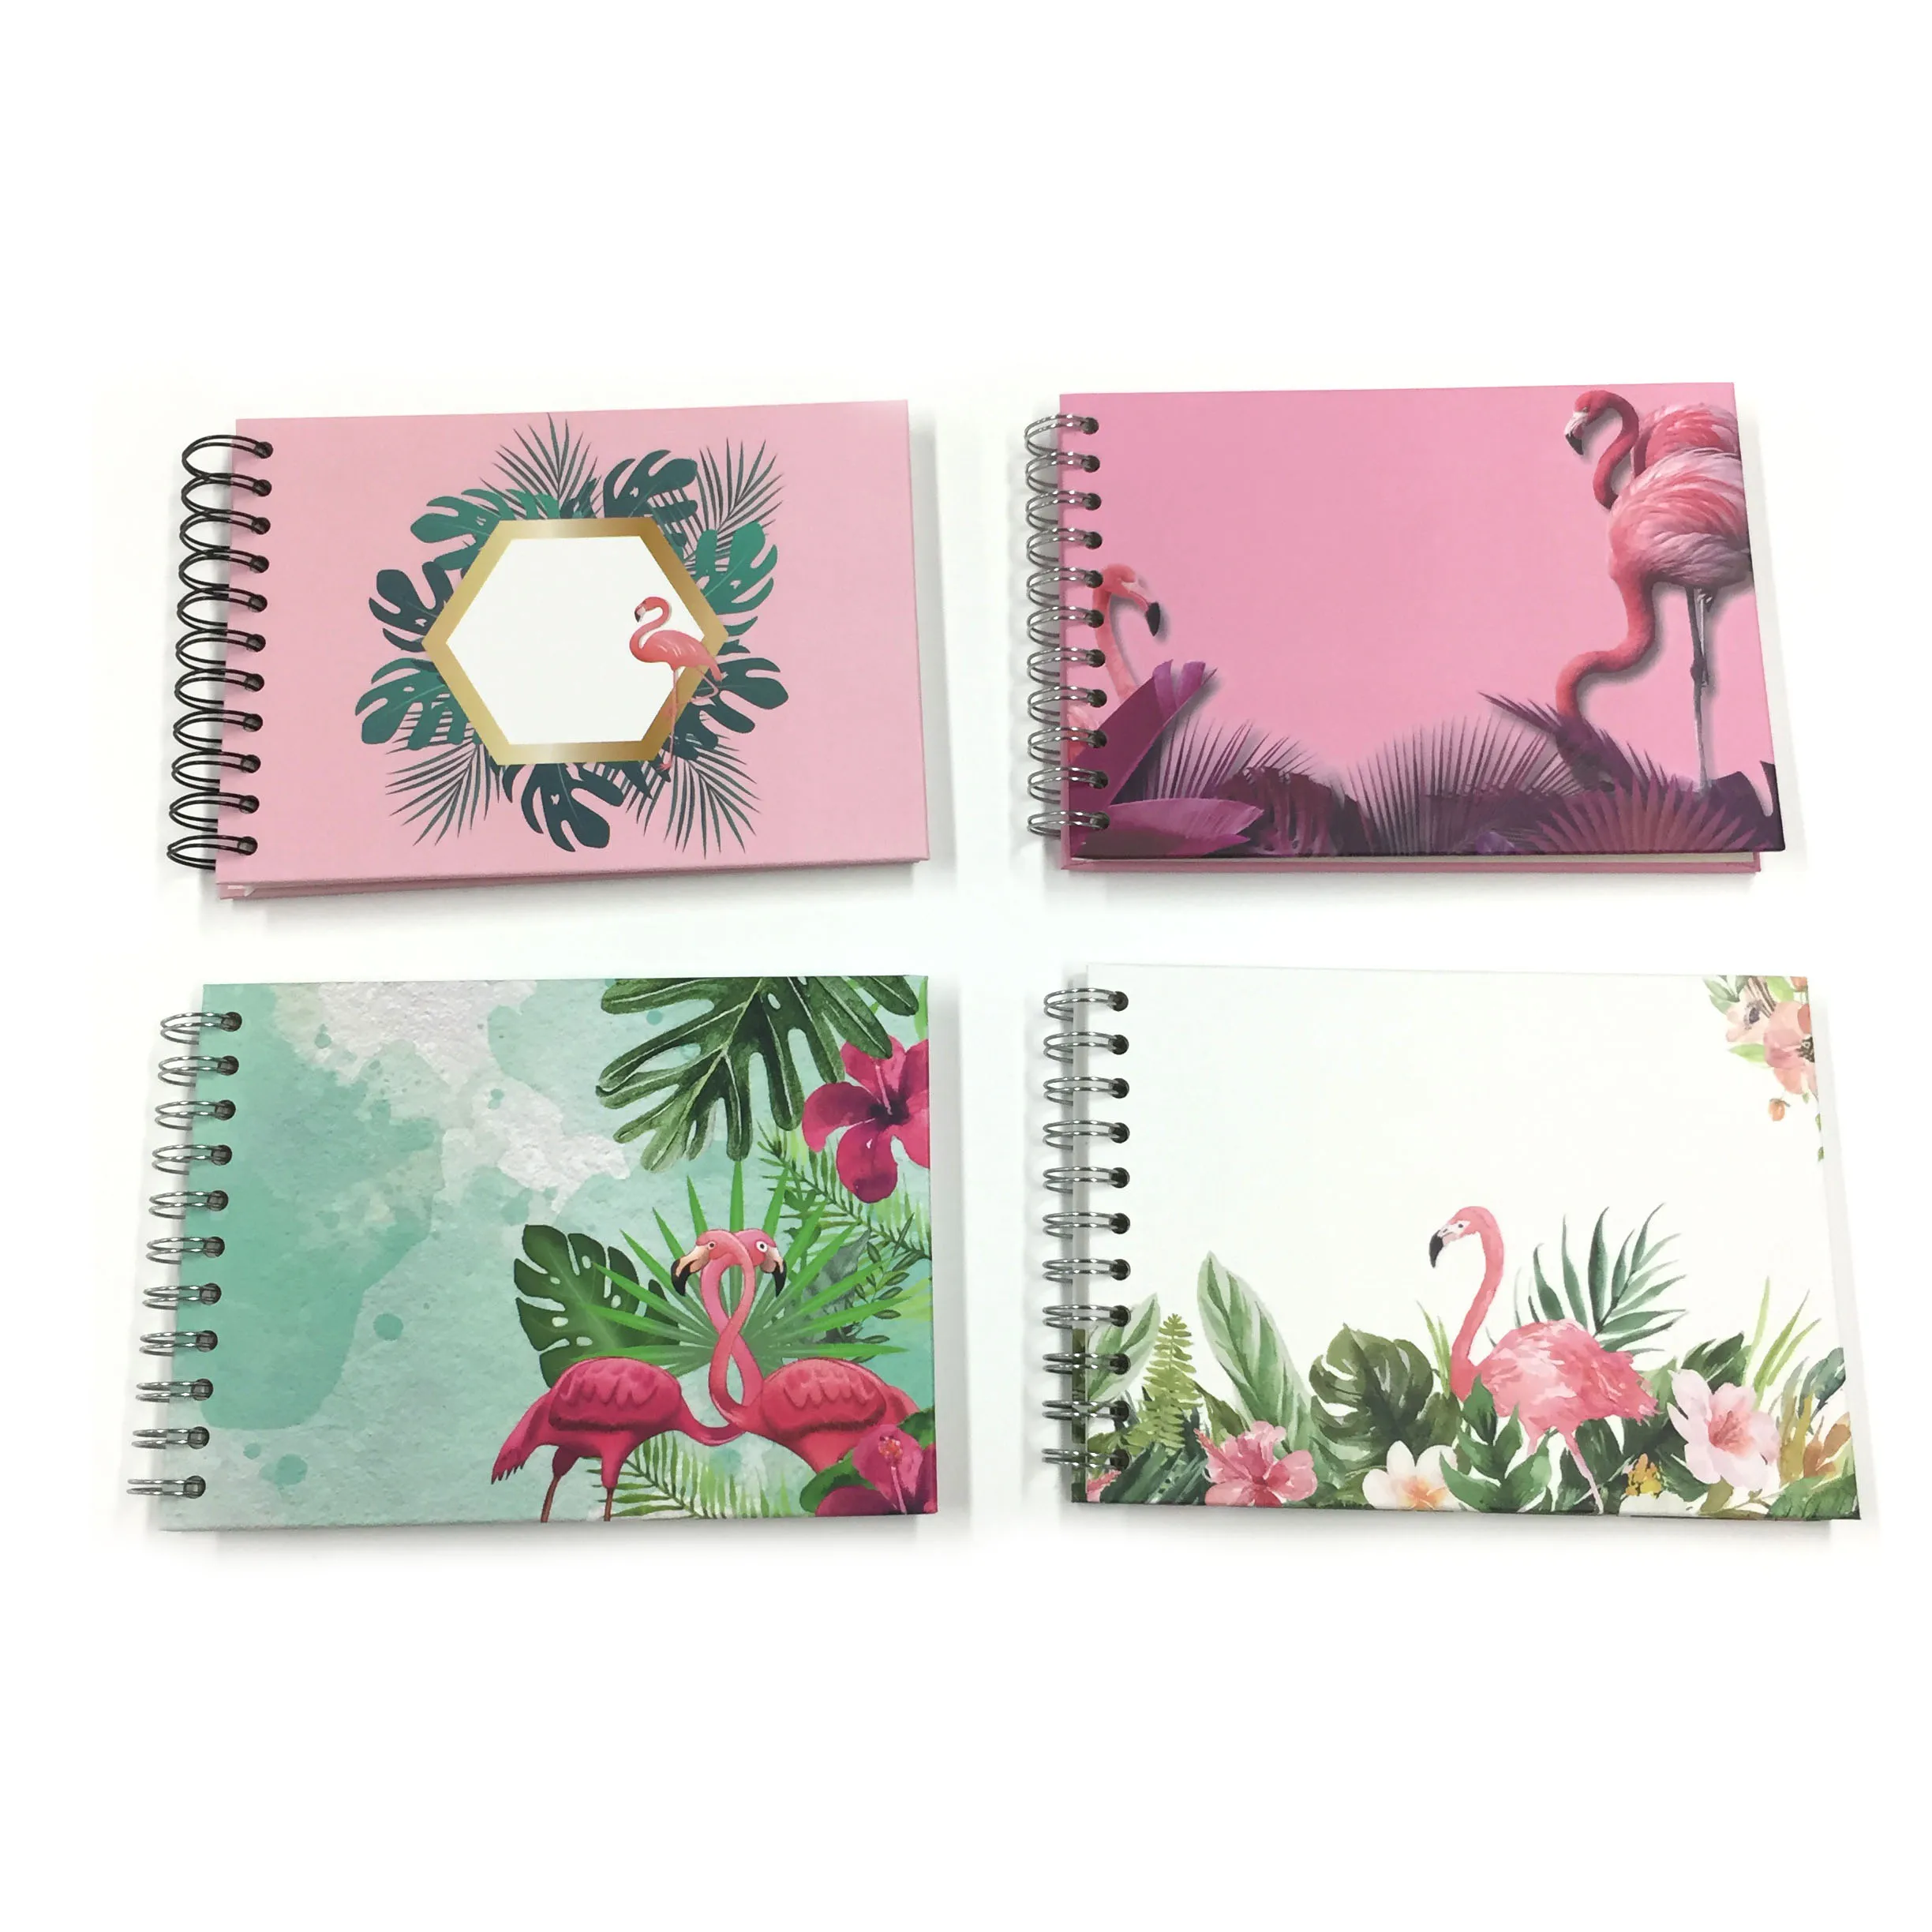 Children Mini Hardcover Scrapbook Photo Album With 20 DIY Self Sticky Pages